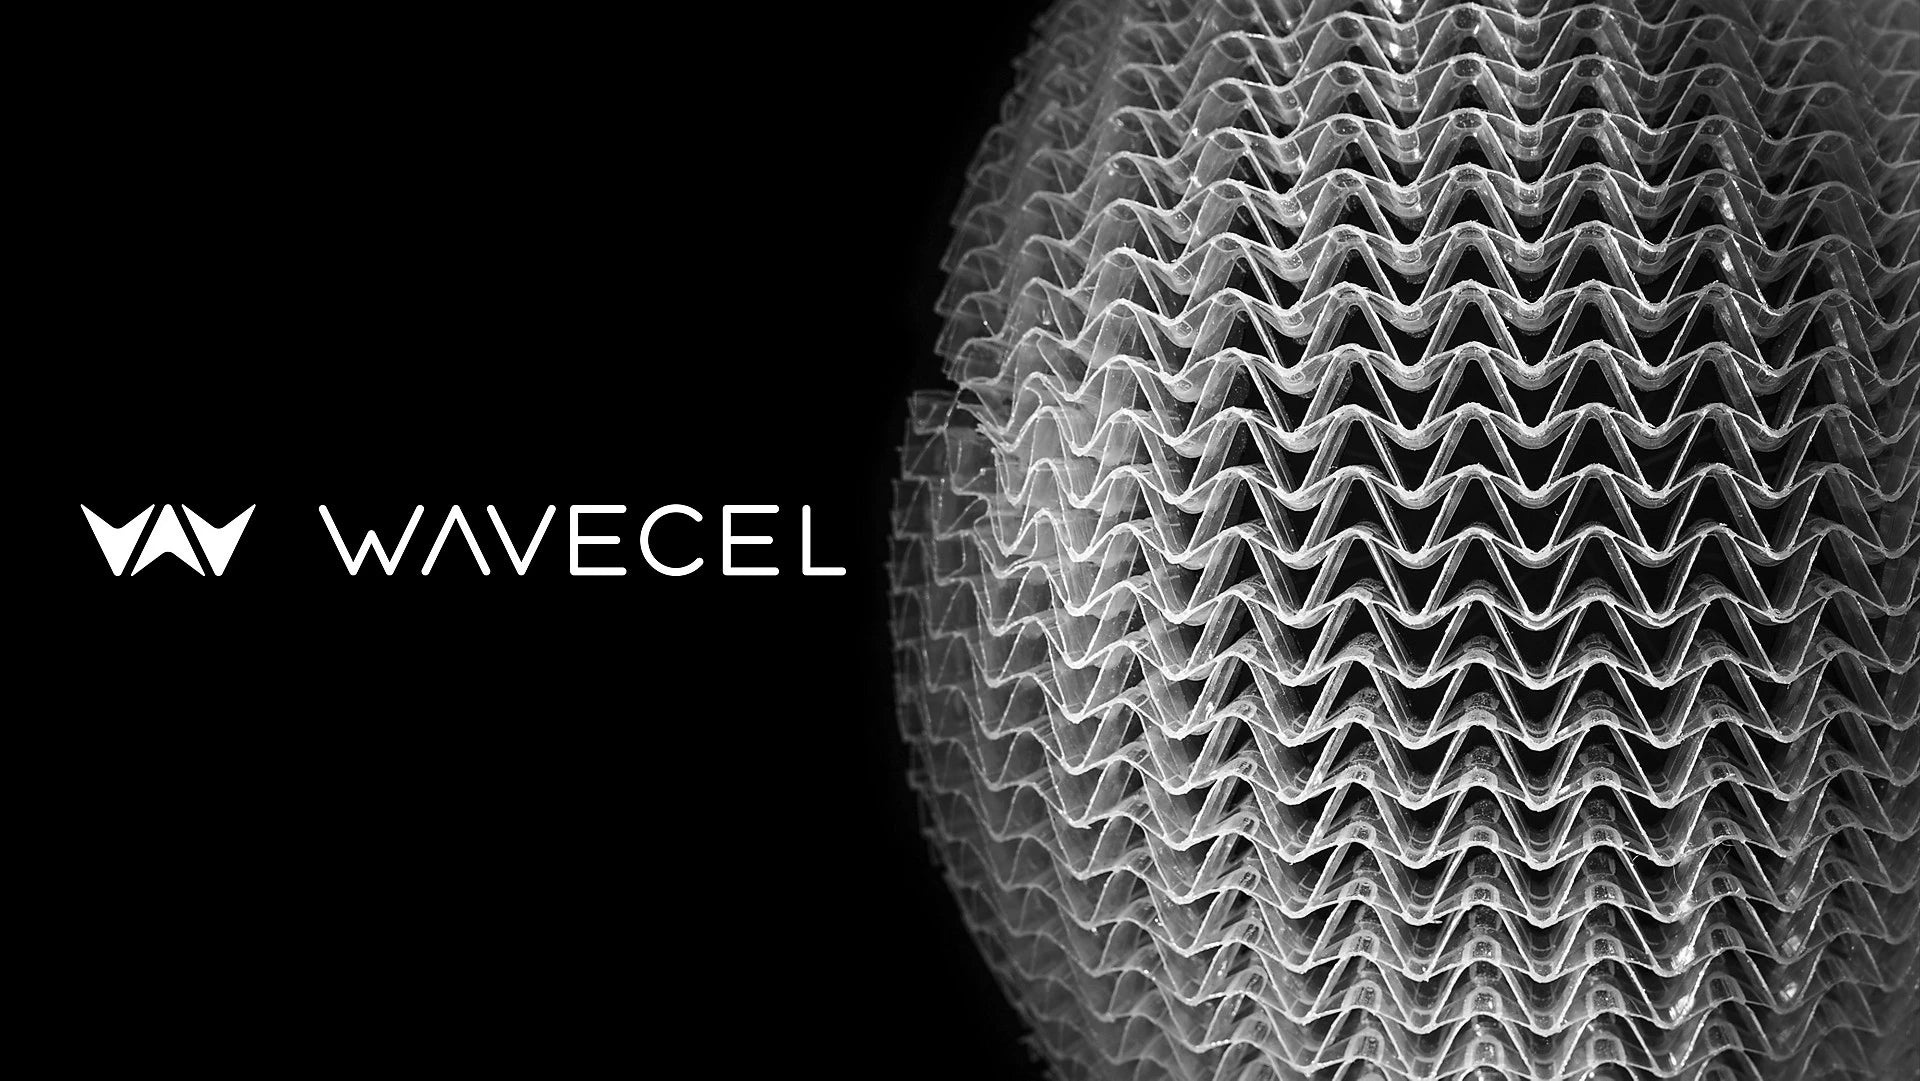 What exactly is WaveCel technology?